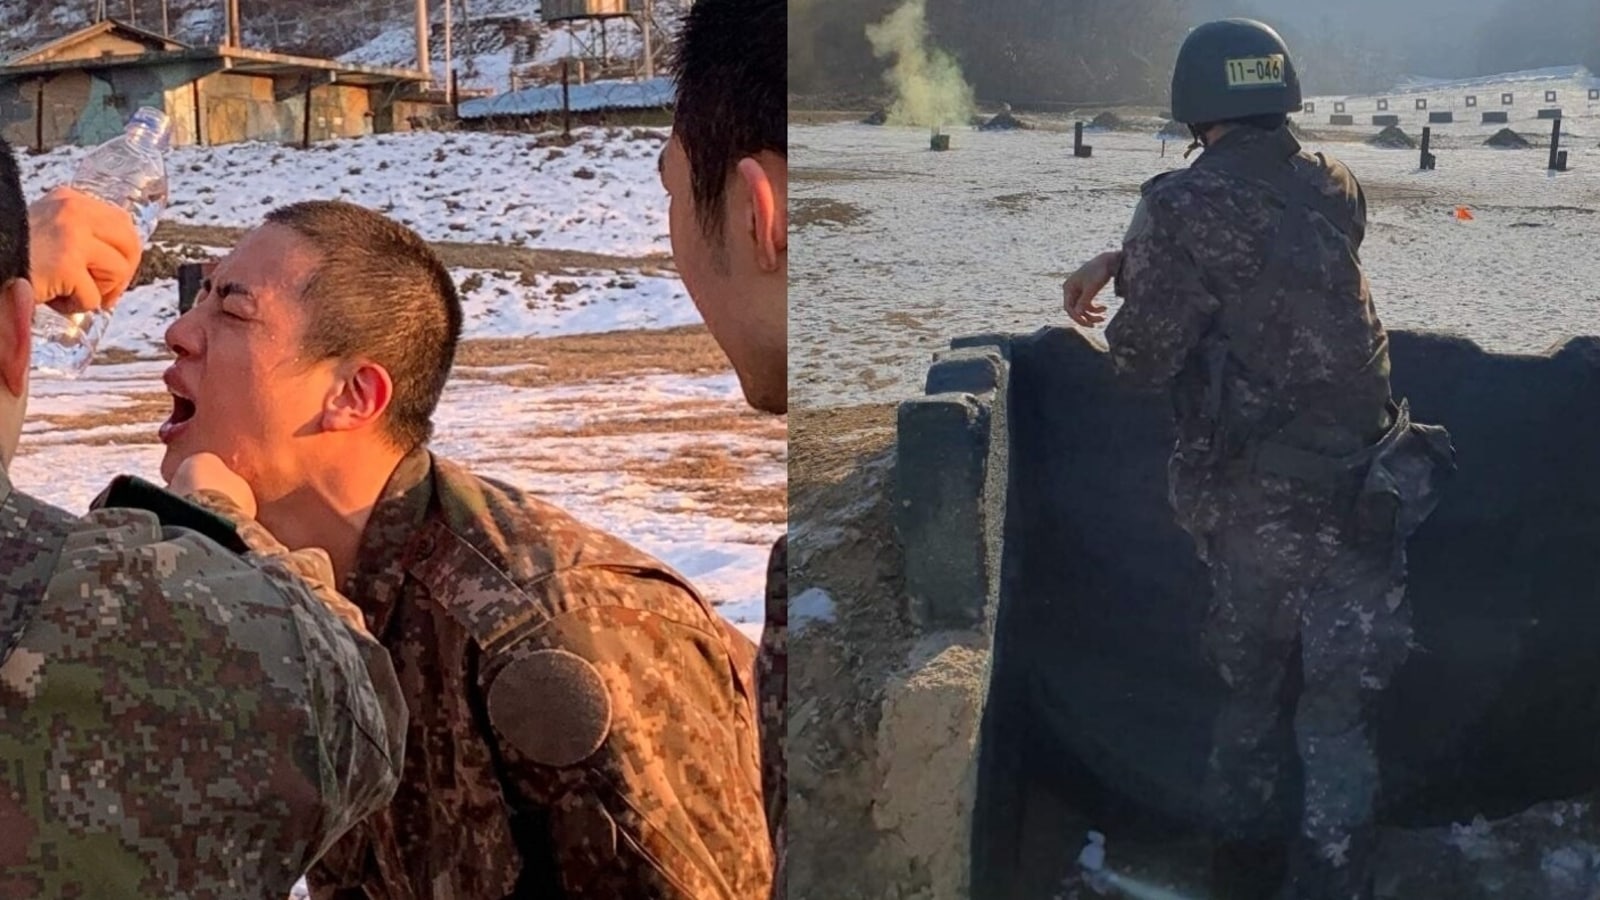 J-Hope shares new pics from military duty, sends fans into a